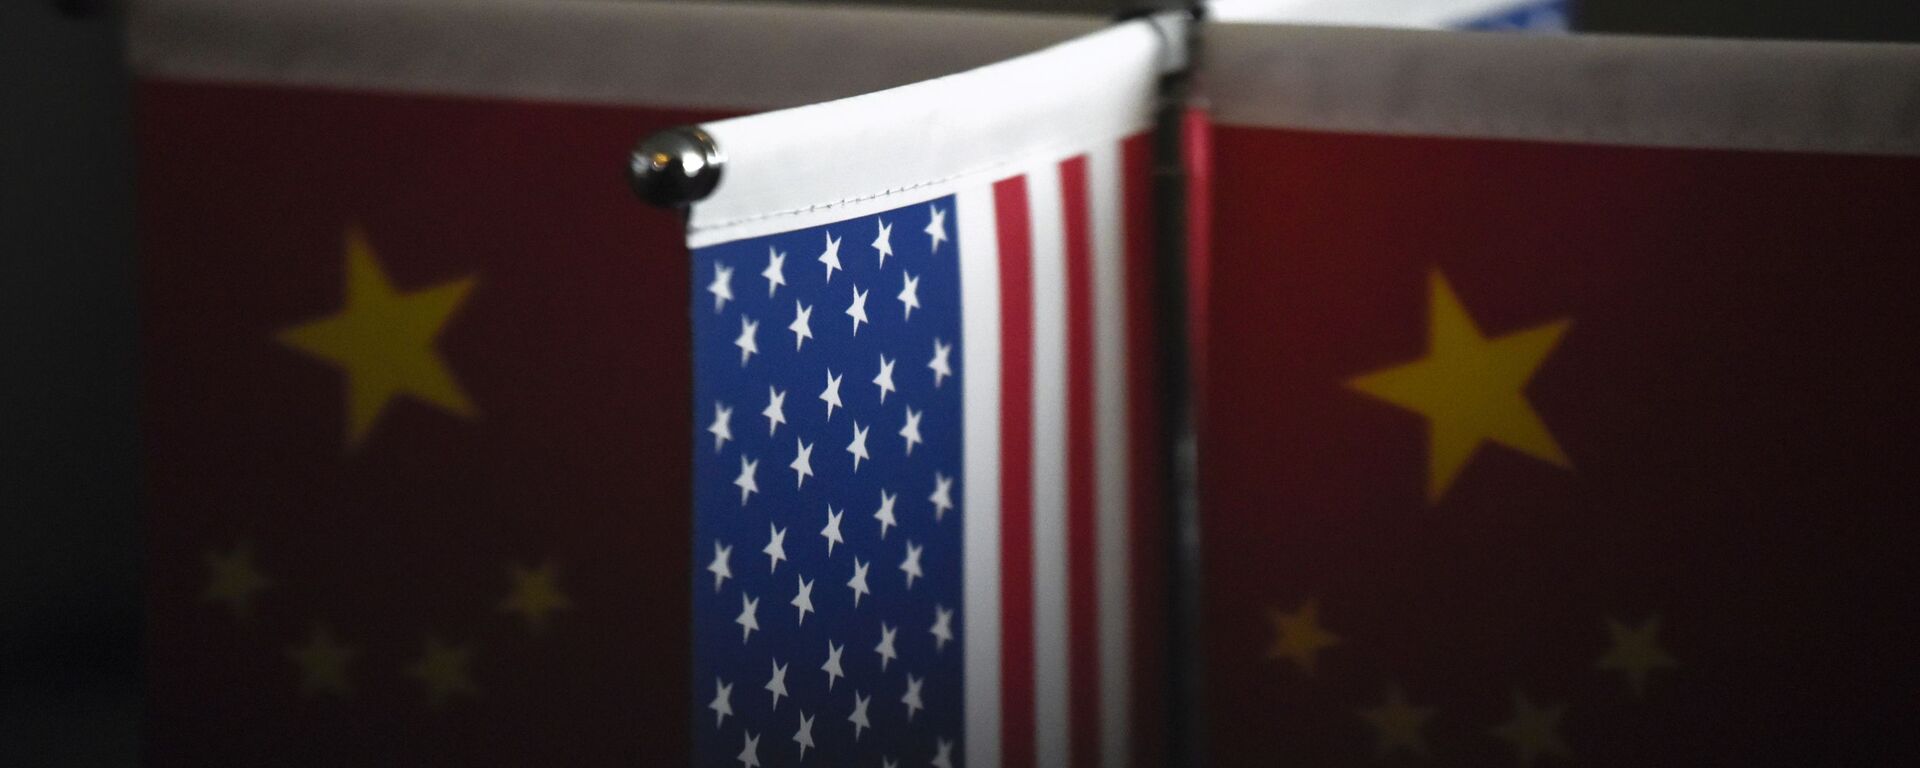 Chinese flags and American flags are displayed in a company in Beijing on August 16, 2017 - Sputnik International, 1920, 11.02.2021